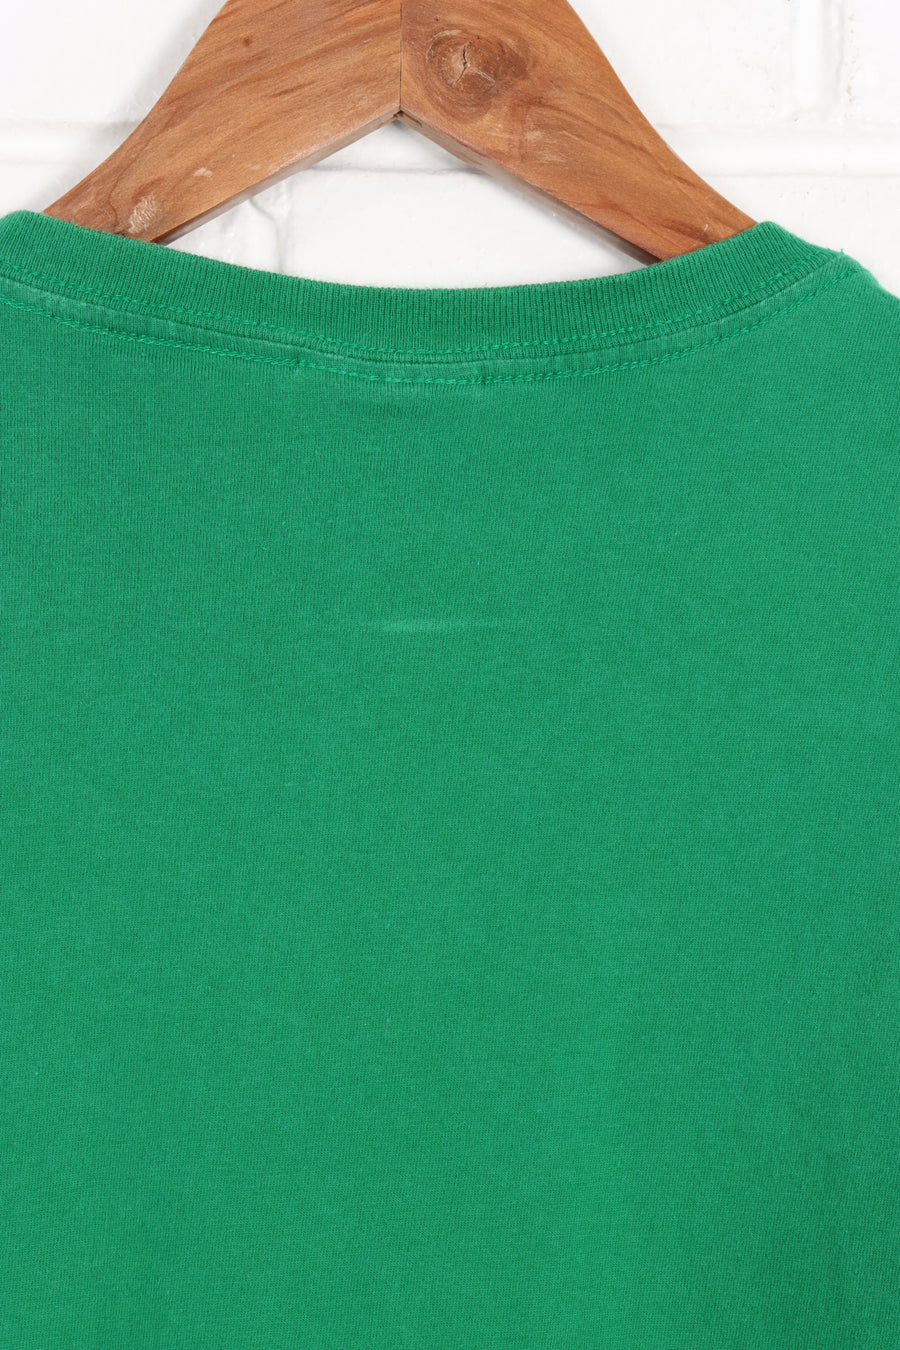 POLO RALPH LAUREN Green & Navy Embroidered Pocket Single Stitch Tee (M-L)